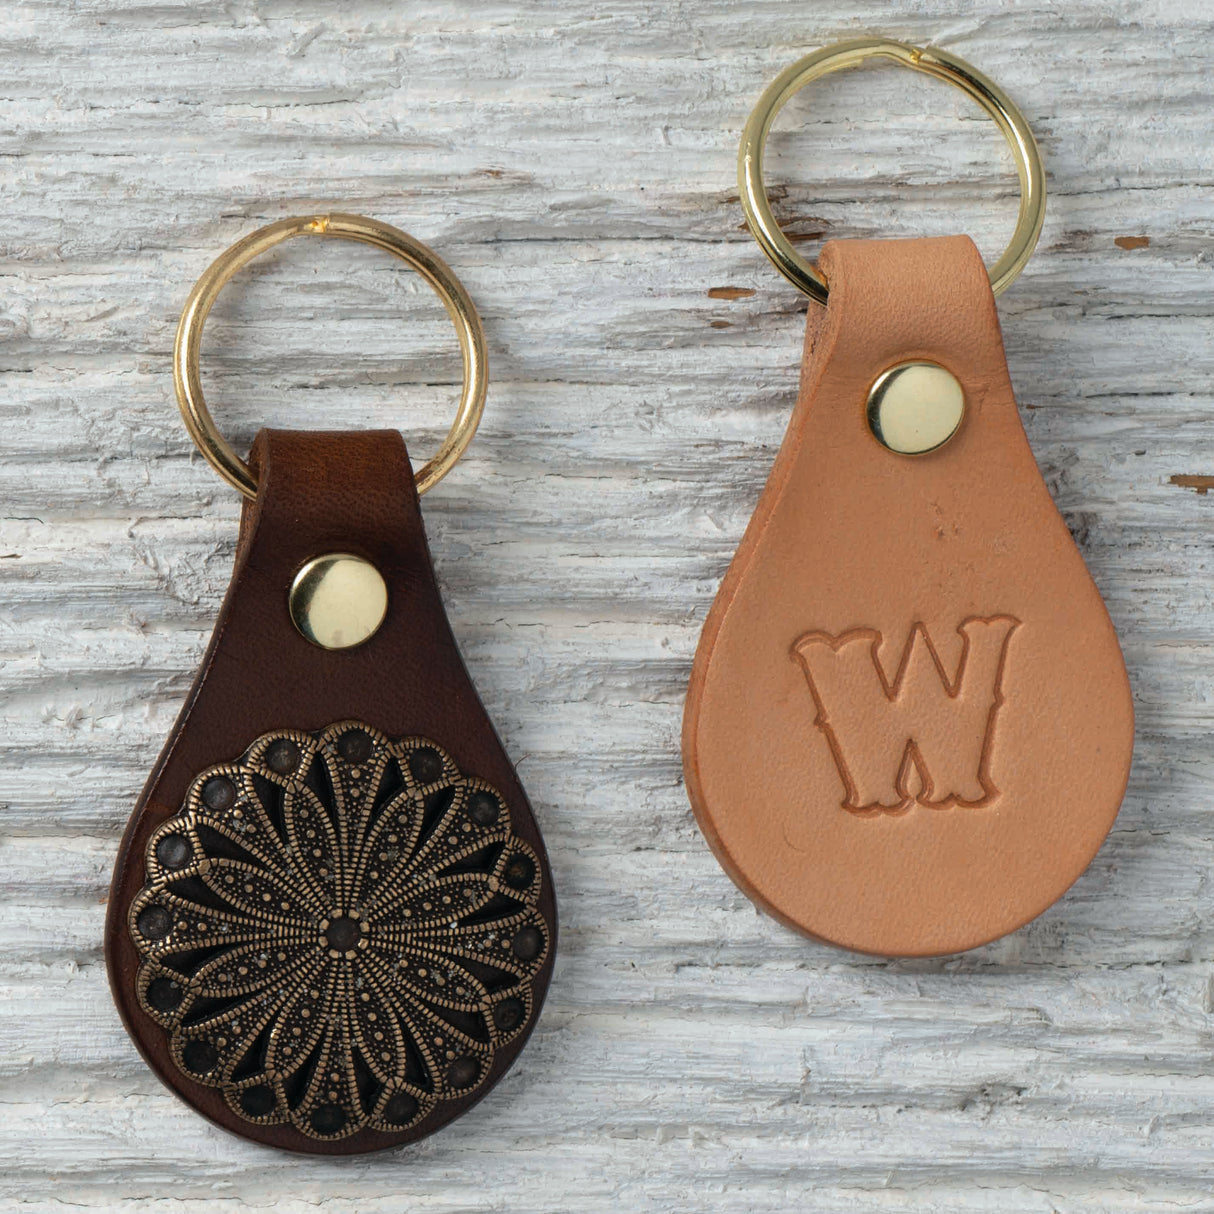 Custom Leather Clicker & Cutting Dies - Weaver Leather Supply